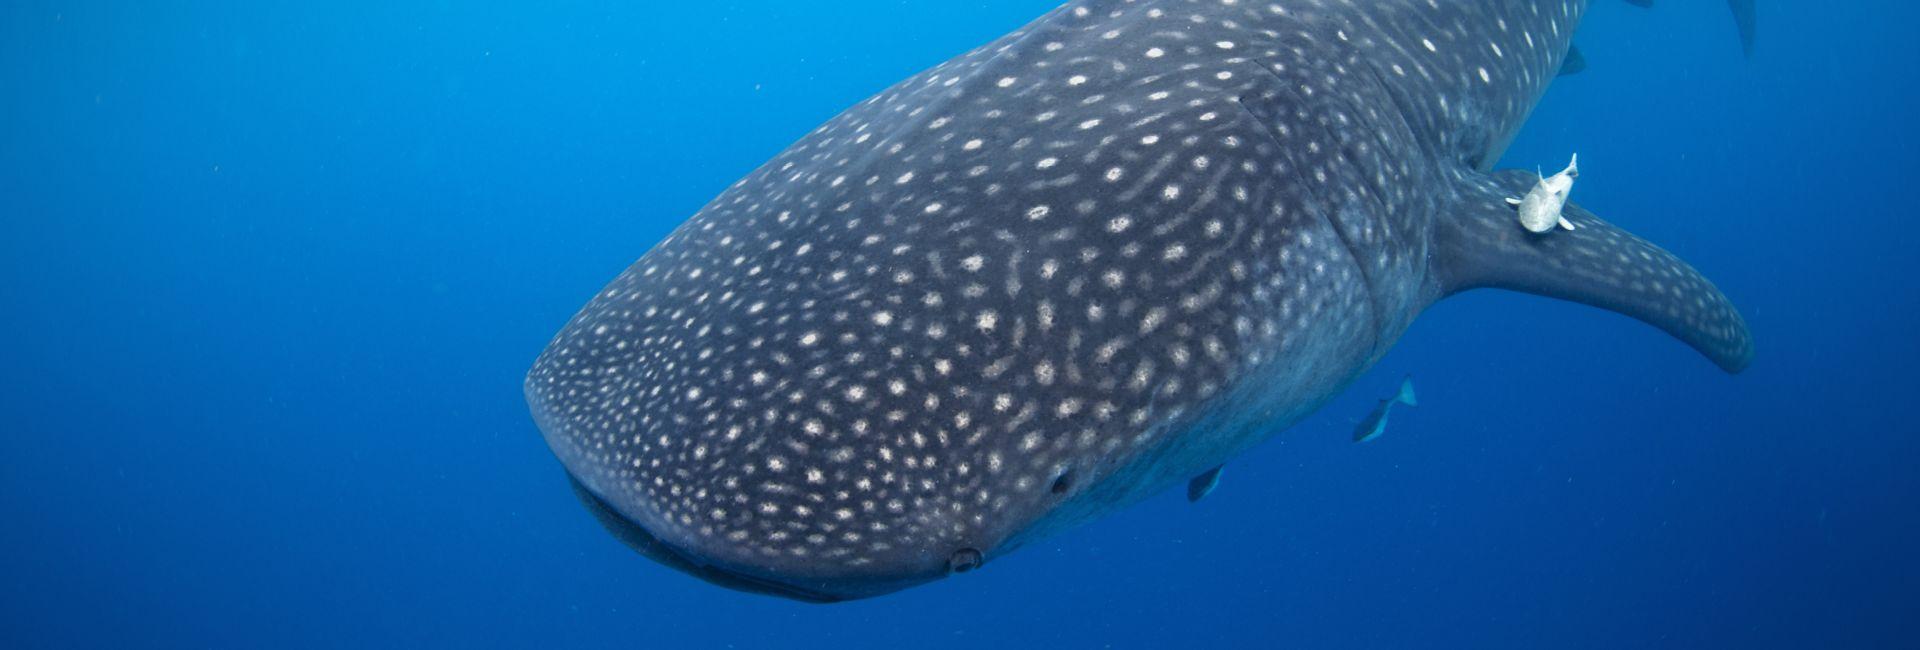 International Whale Shark Day - A Majestic Species At Risk...Due To Tourism?